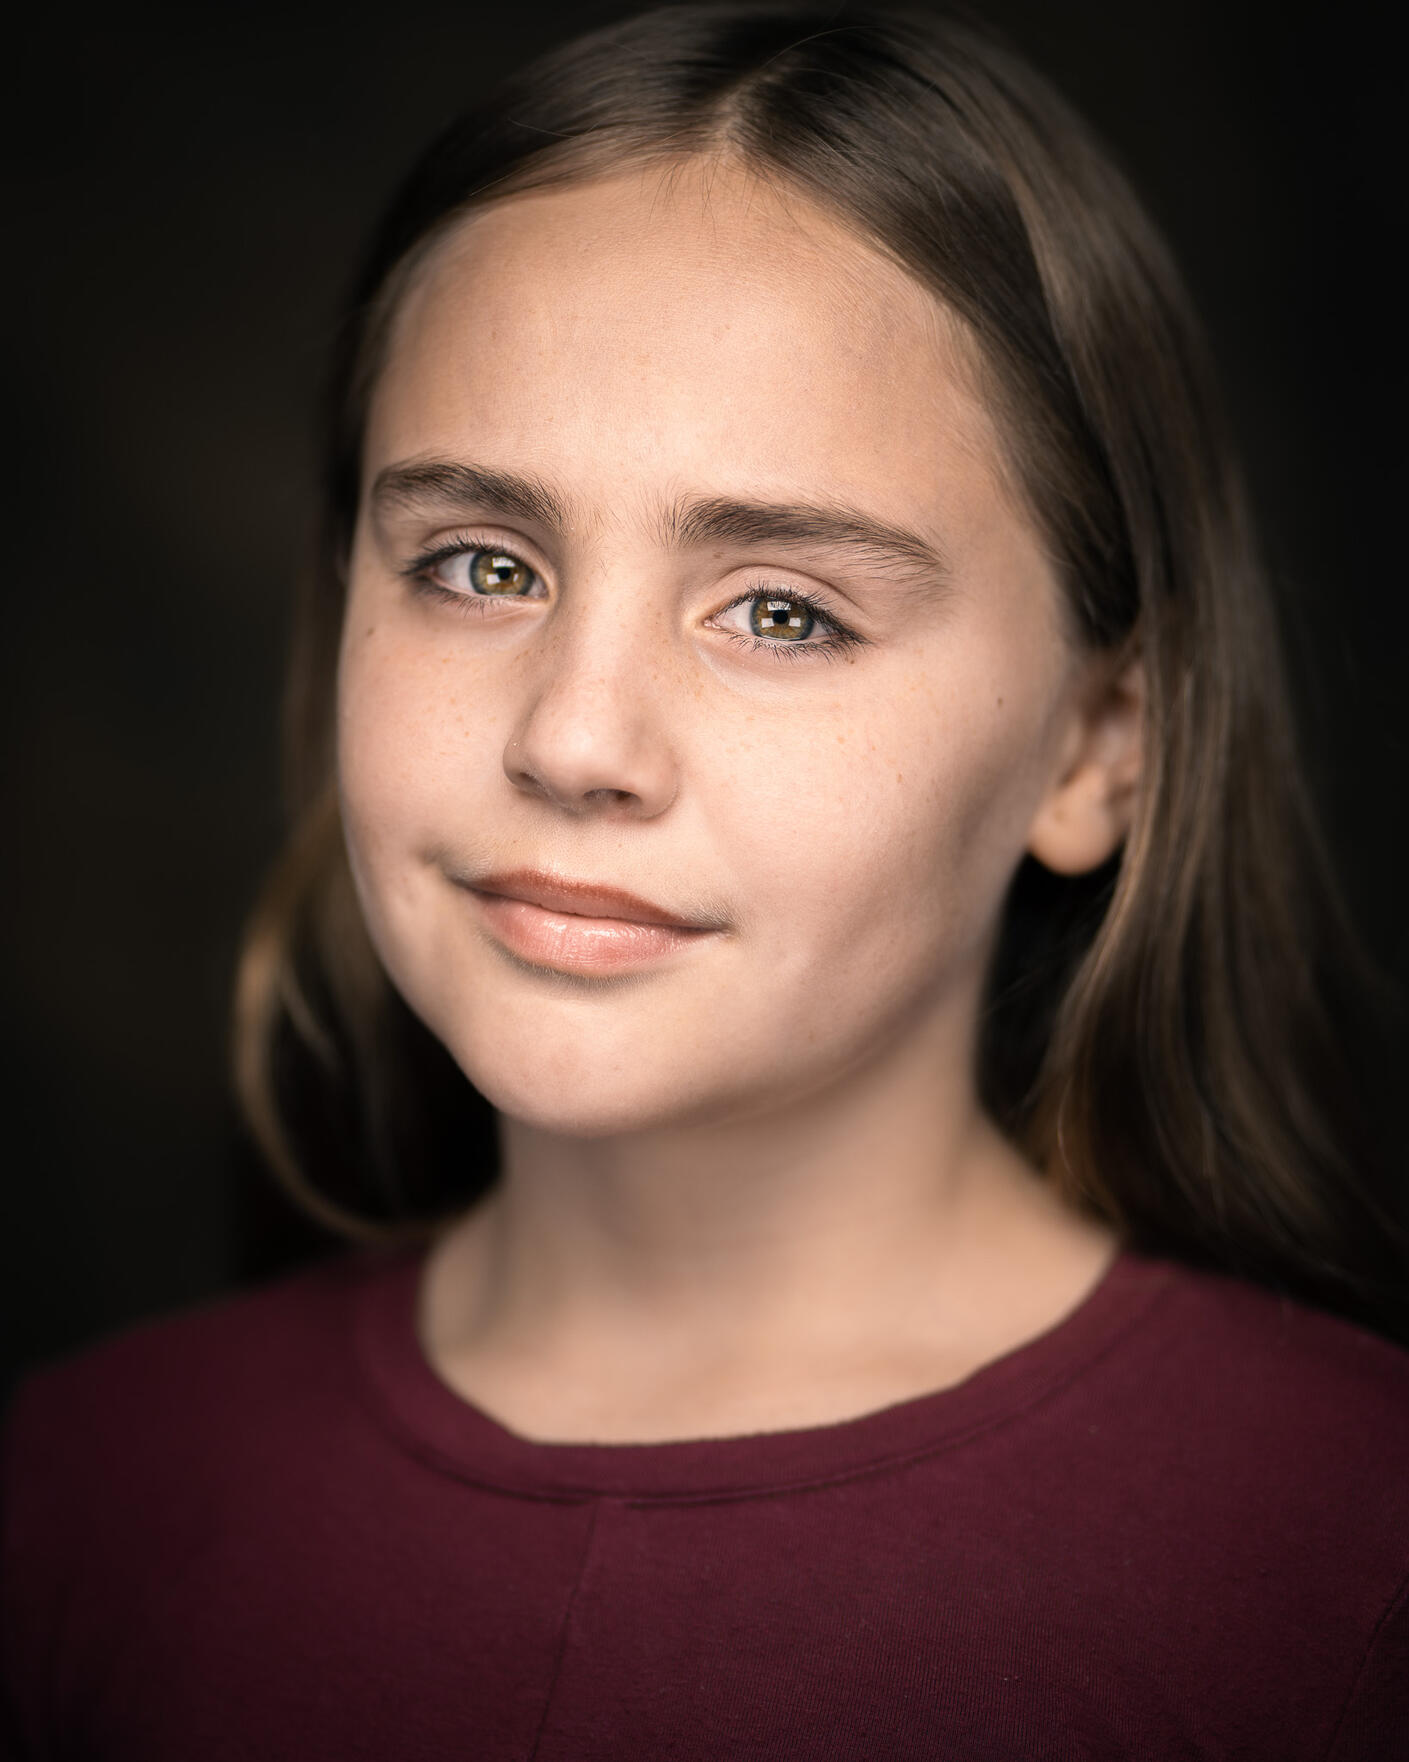 Professional headshots can make the difference for young actor auditions in Dallas area.